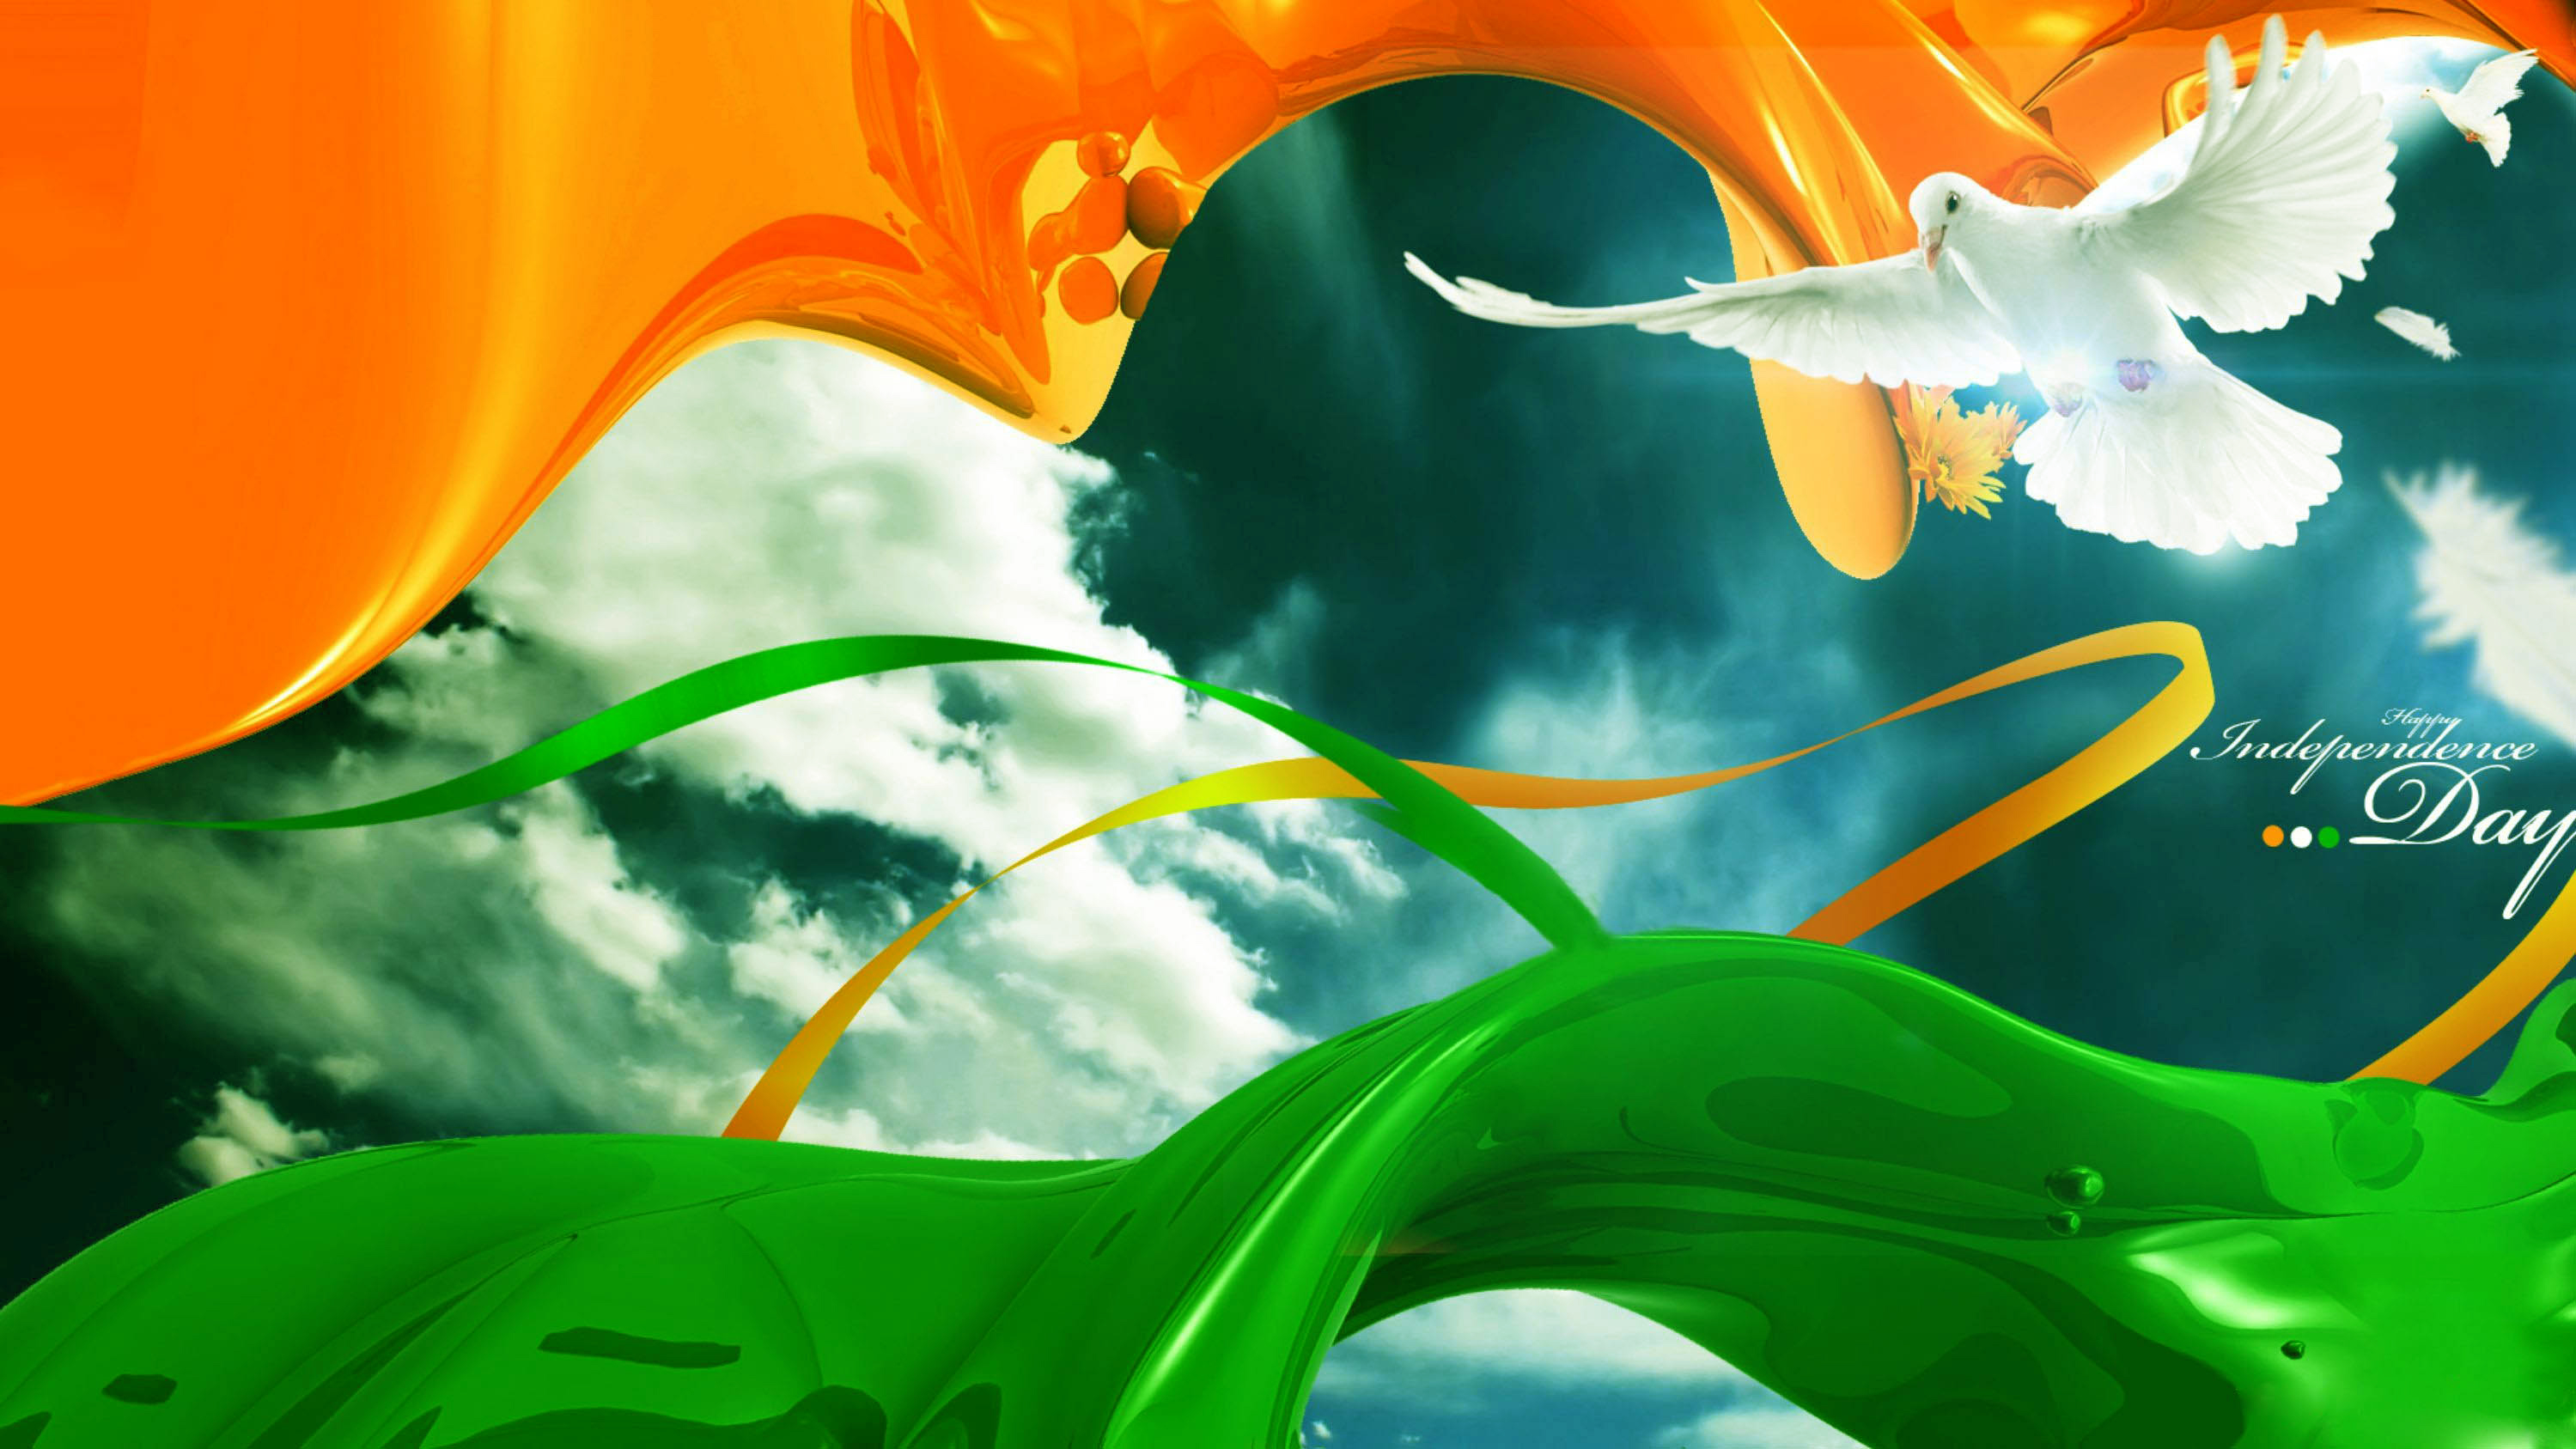 Free download 15 Aug] India Independence Day HD Image Wallpaper Picture [2999x1687] for your Desktop, Mobile & Tablet. Explore 15 August Wallpaper August Wallpaper, August 15 India Independence Day Wallpaper, Pakistani Wallpaper 14 August